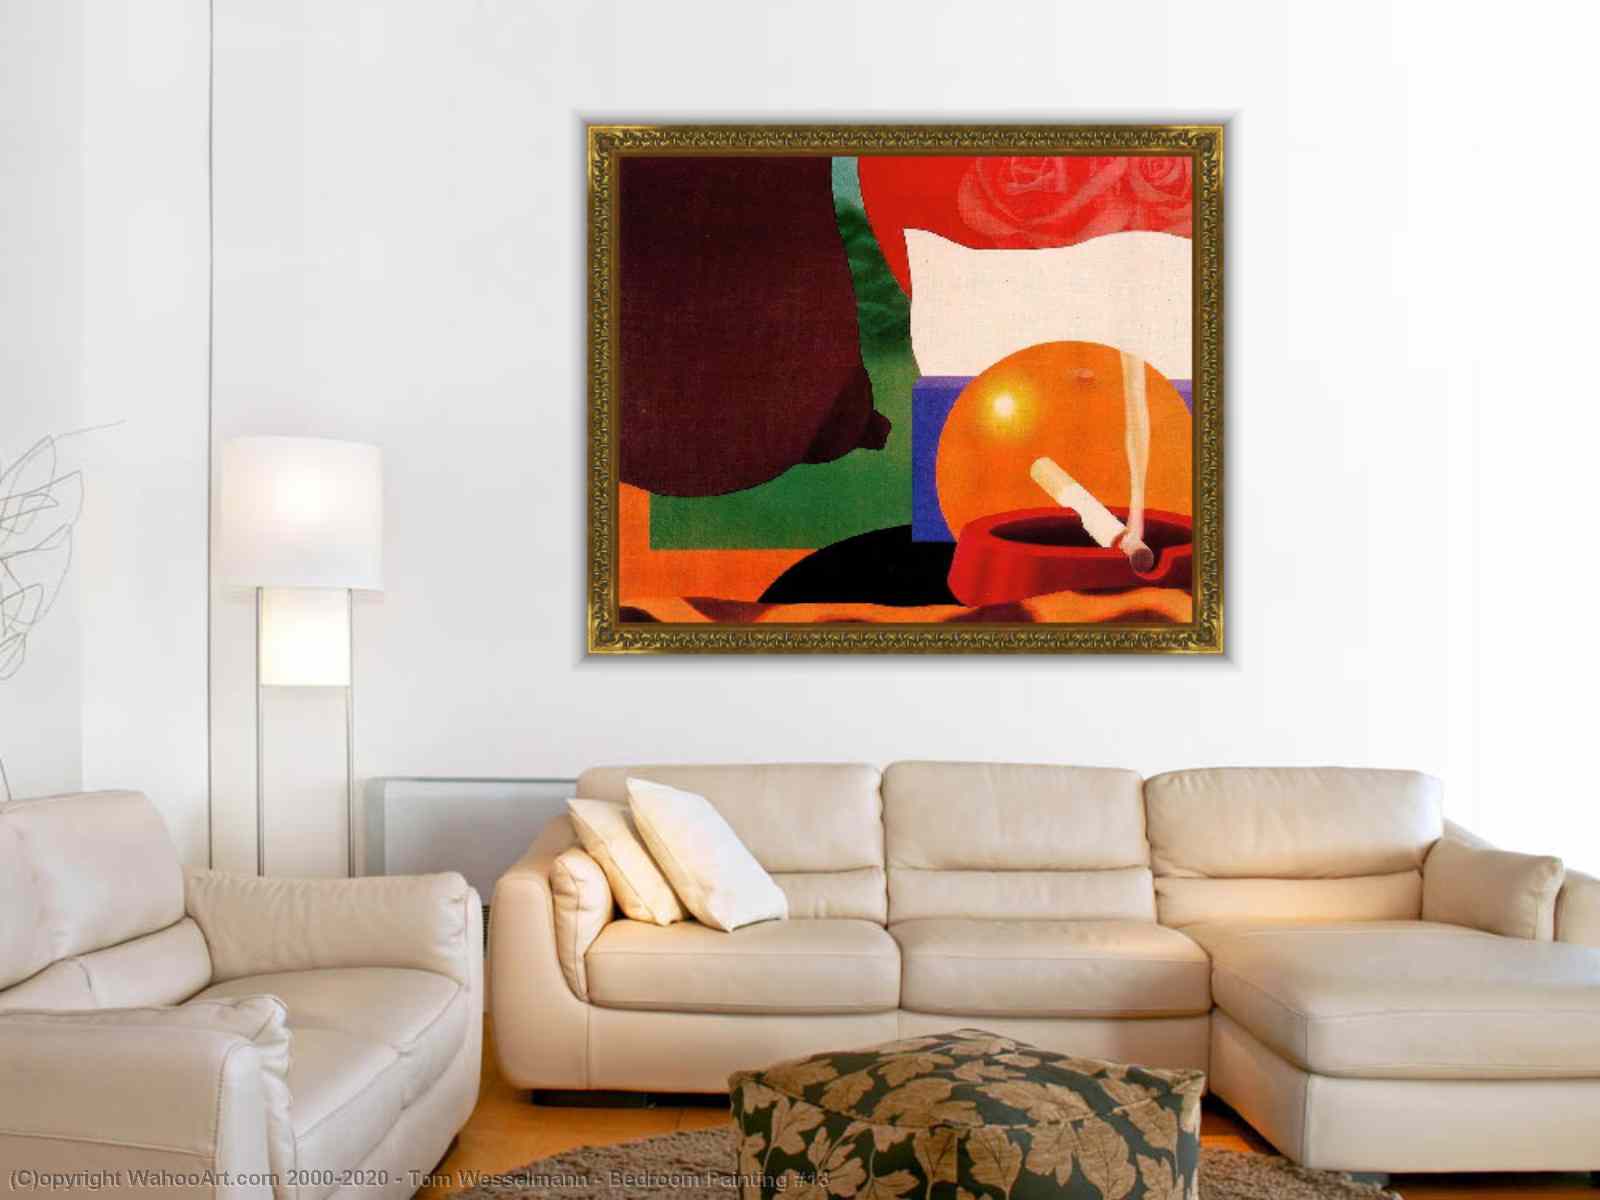 Museum Art Reproductions Pop Art Bedroom Painting -13 by Tom Wesselmann  (Inspired By)